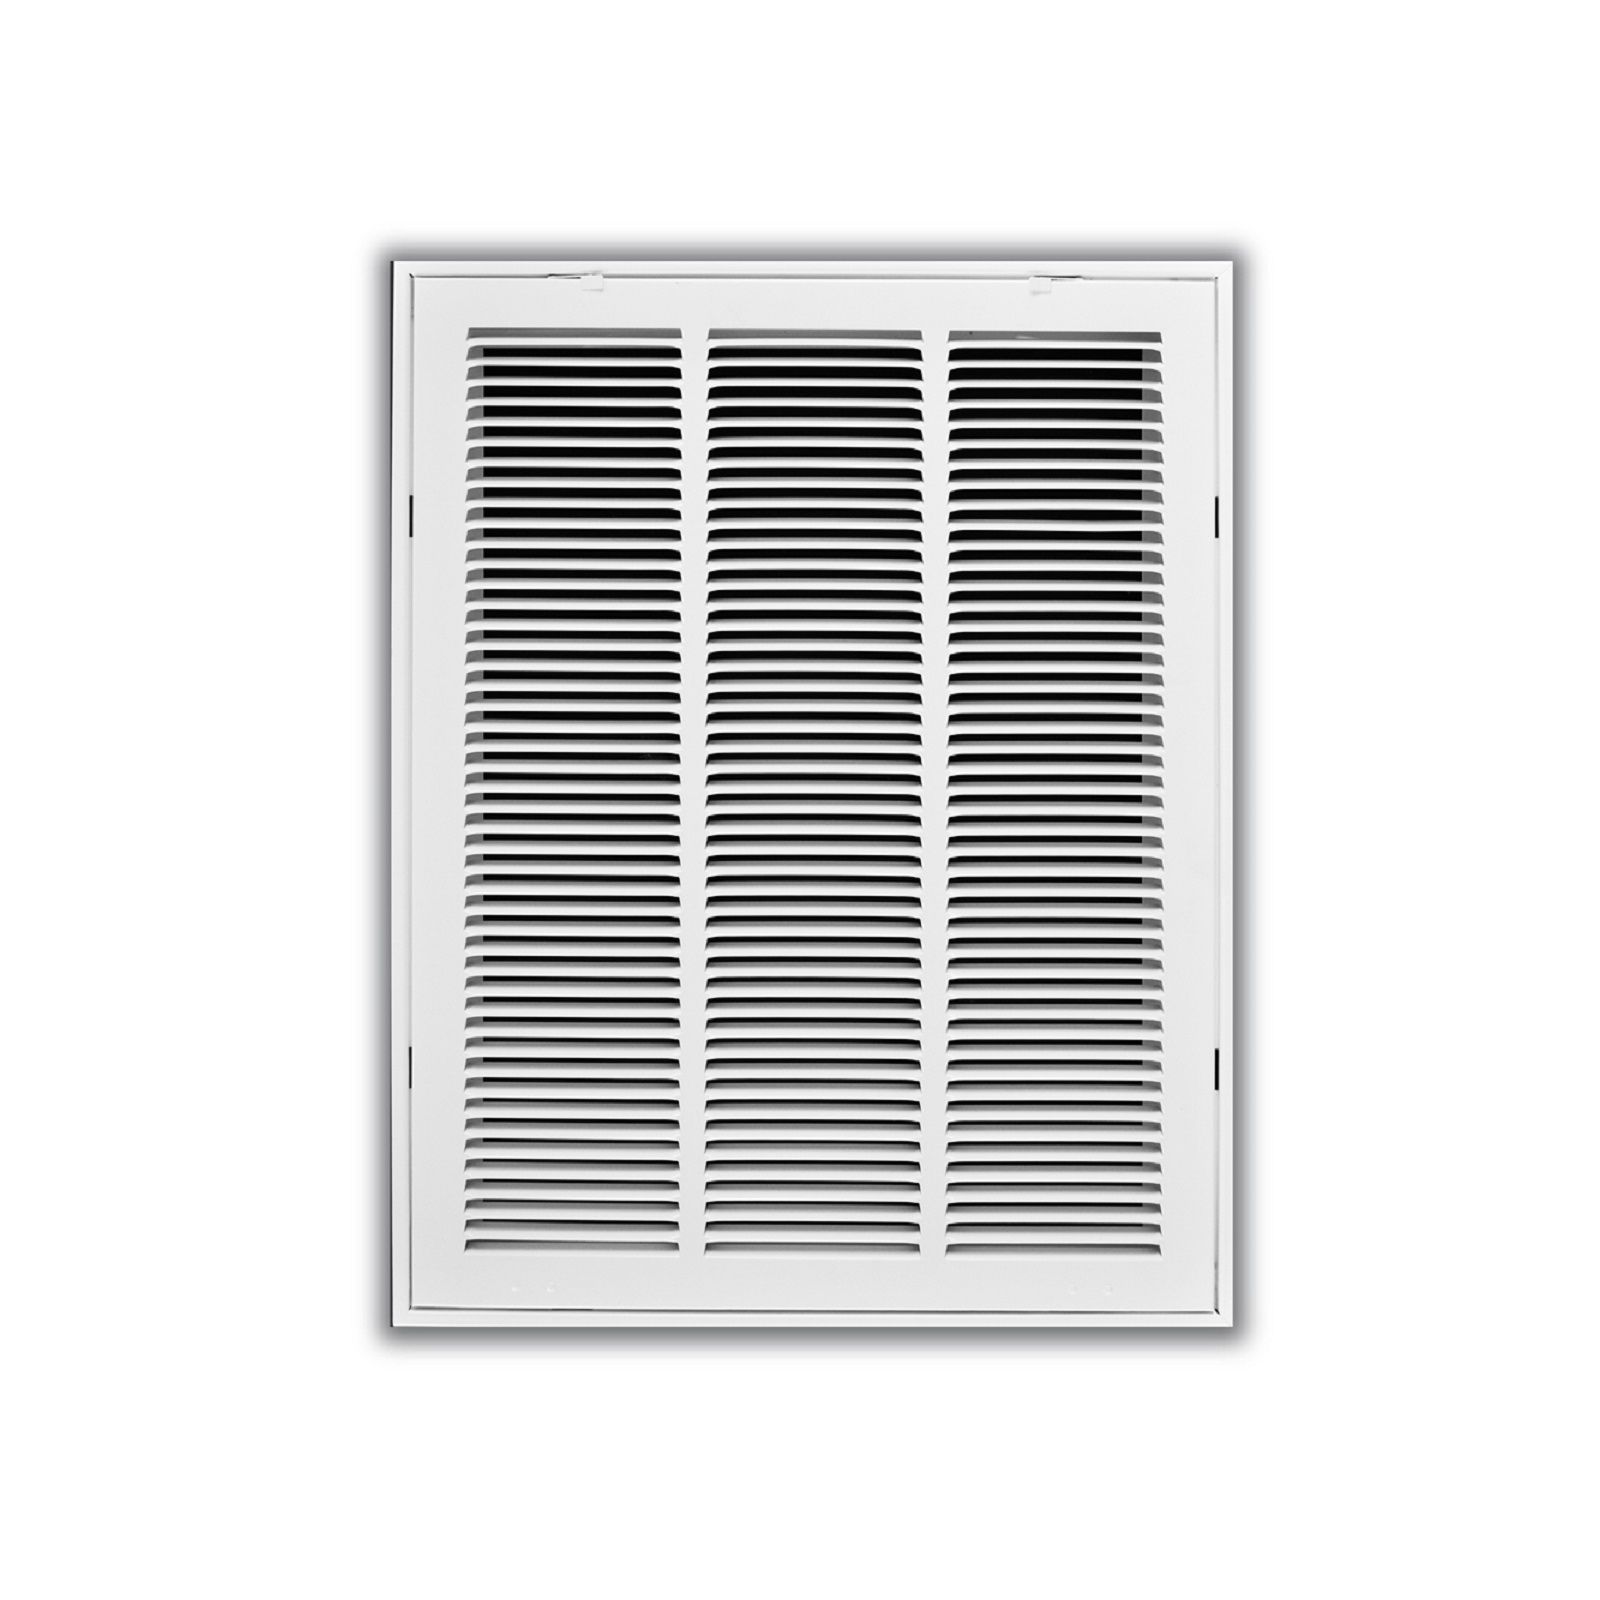 TRUaire 190 20X14 - Steel Return Air Filter Grille With Fixed Hinged Face, White, 20" X 14"